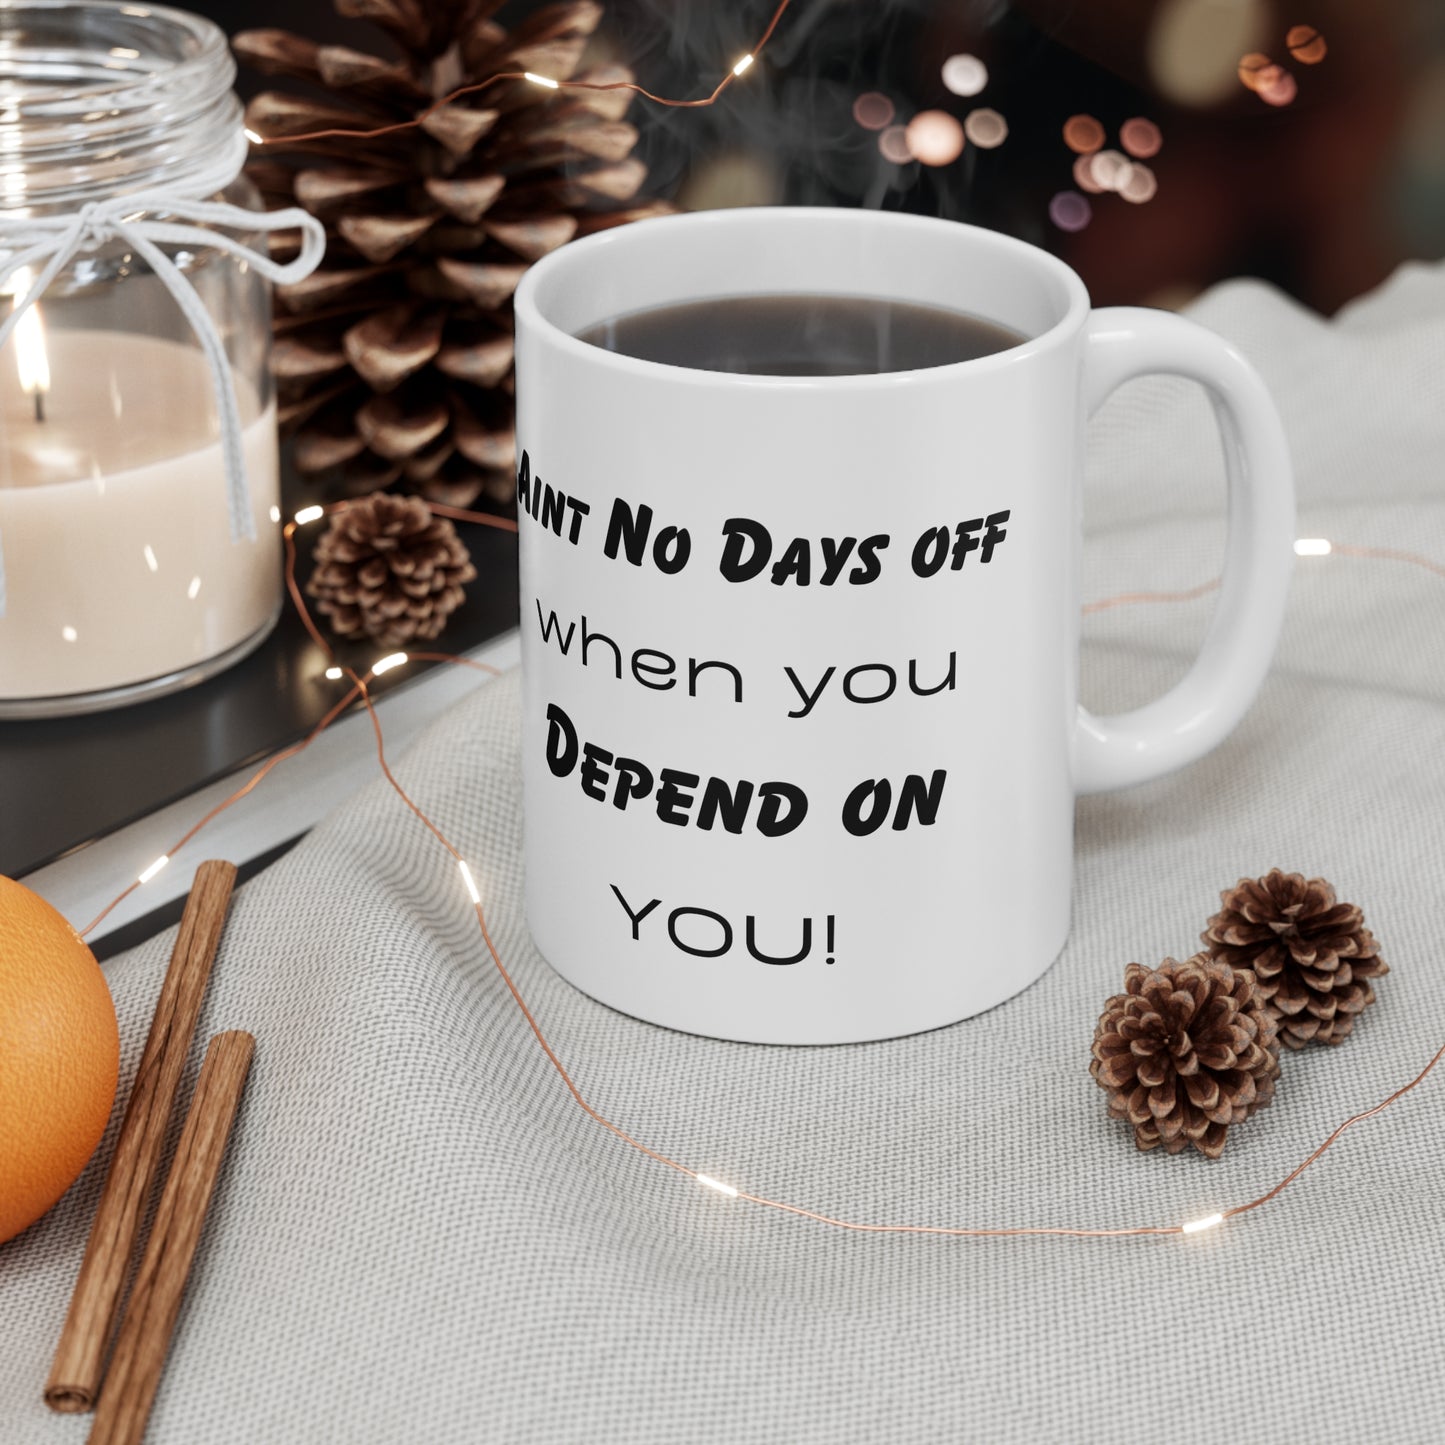 Aint no days off when you depend on YOU! Ceramic Coffee Cups, 11oz, 15oz